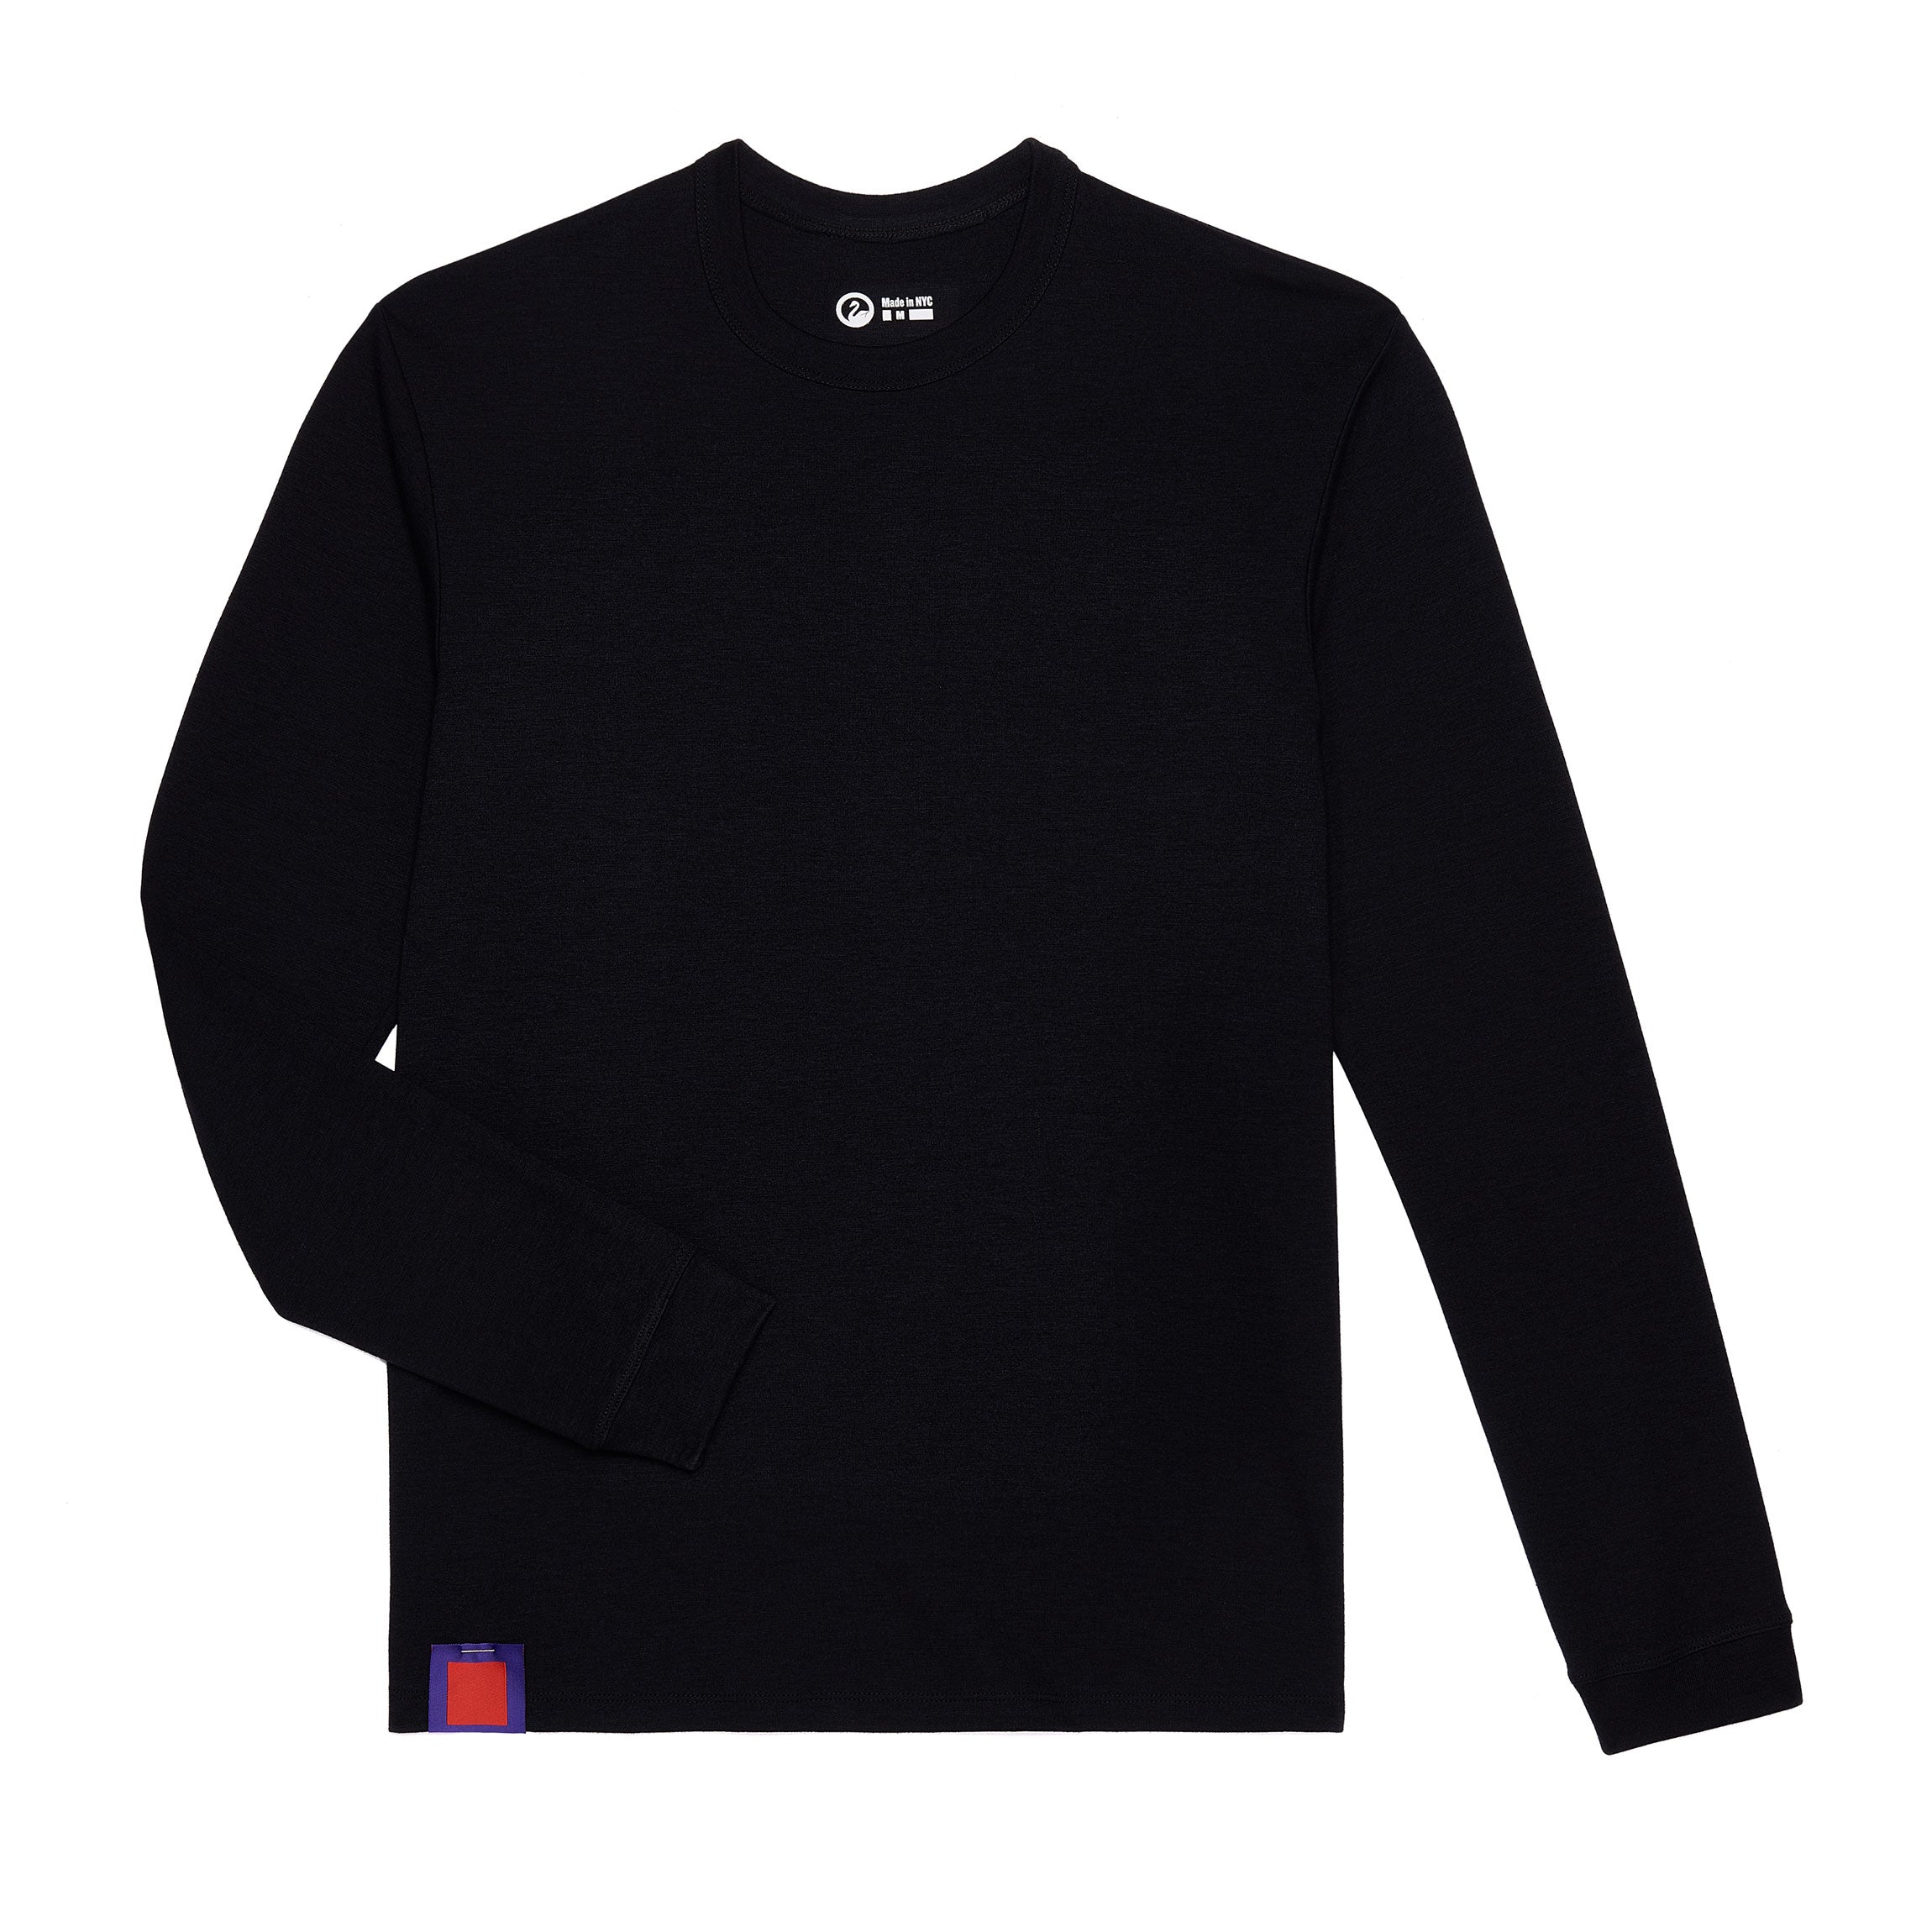 Outlier - Experiment 353 - Cottomerino Longsleeve – OUTLIER